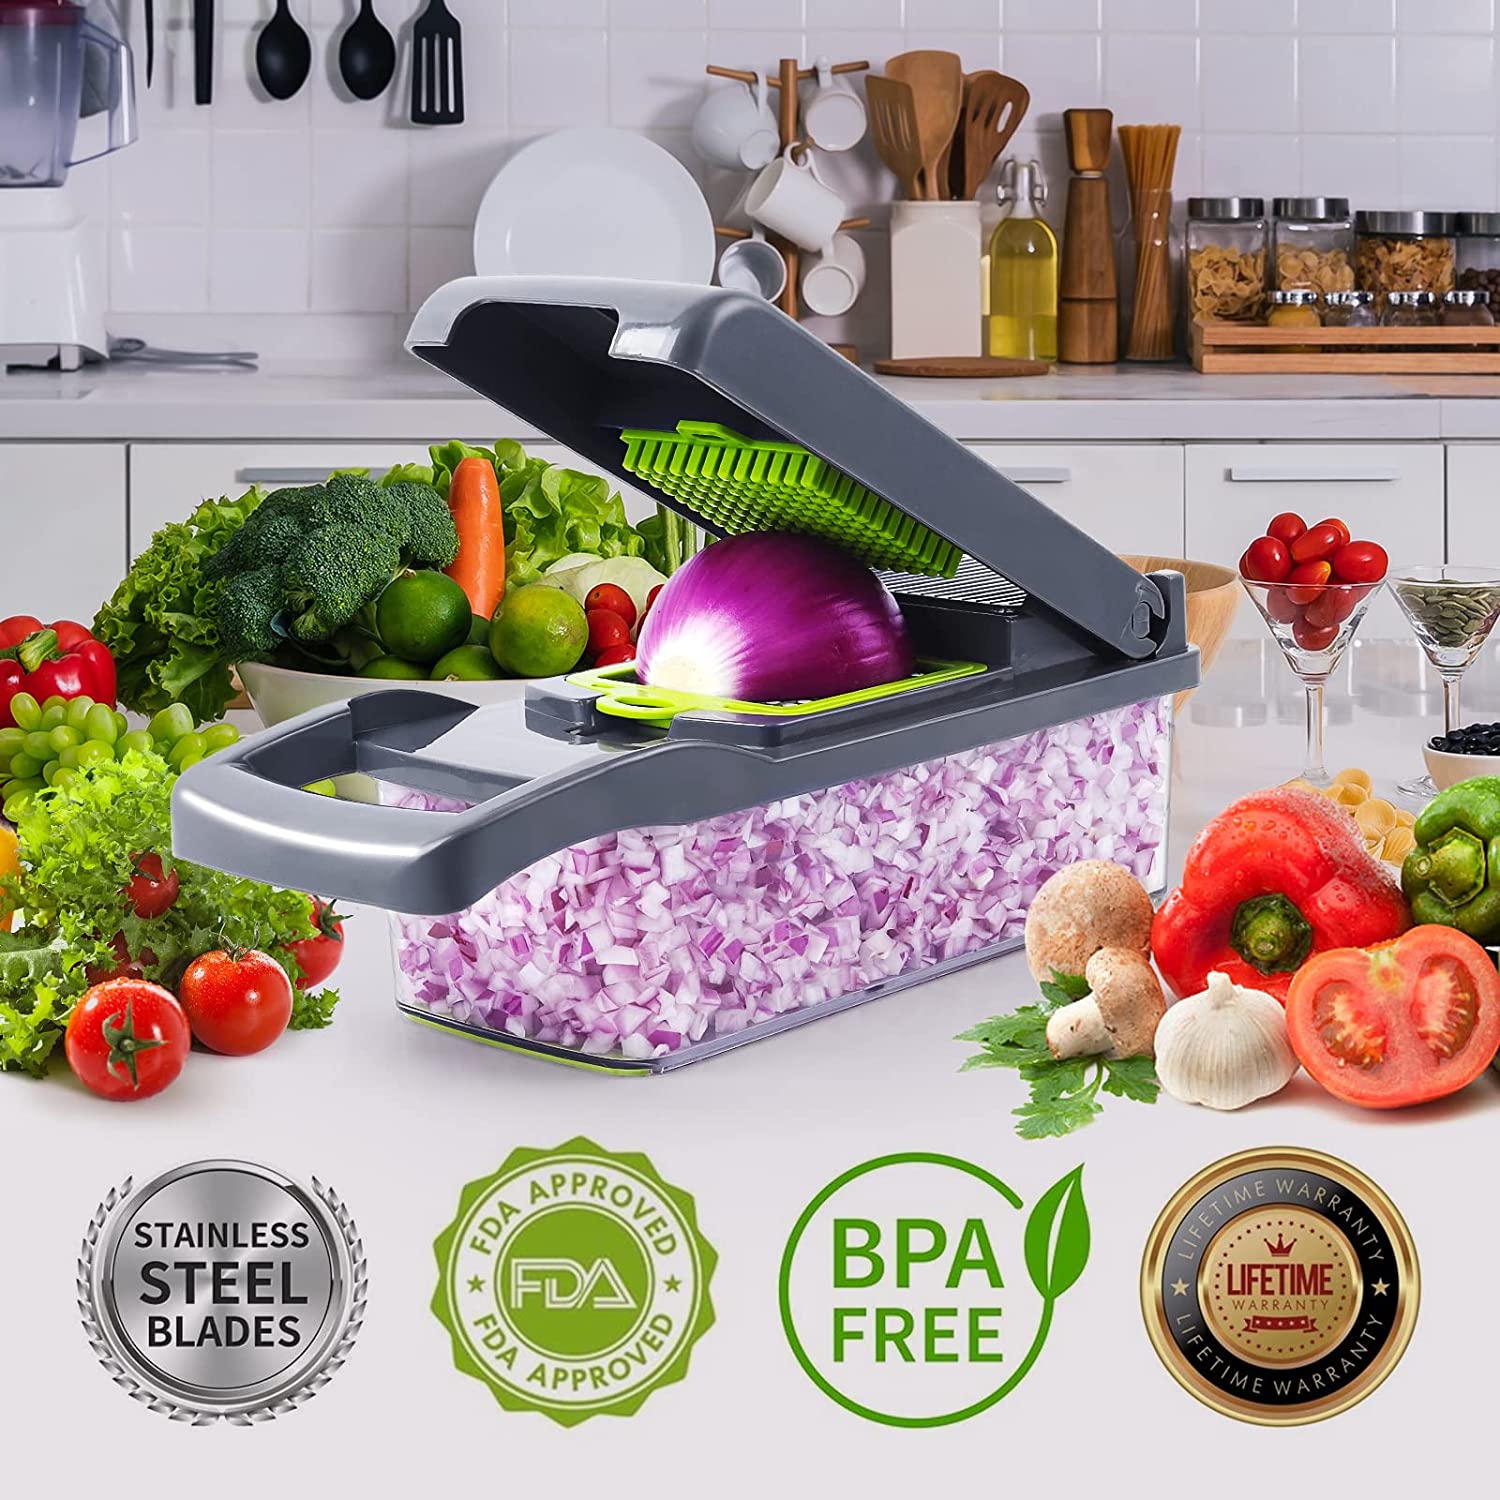 Vegetable Chopper,Prouneed Multifunctional 13-in-1 Food Choppers Onion  Chopper Vegetable Slicer Cutter Dicer Veggie chopper with Blades,Colander  Basket,Container for Salad Potato Carrot Garlic